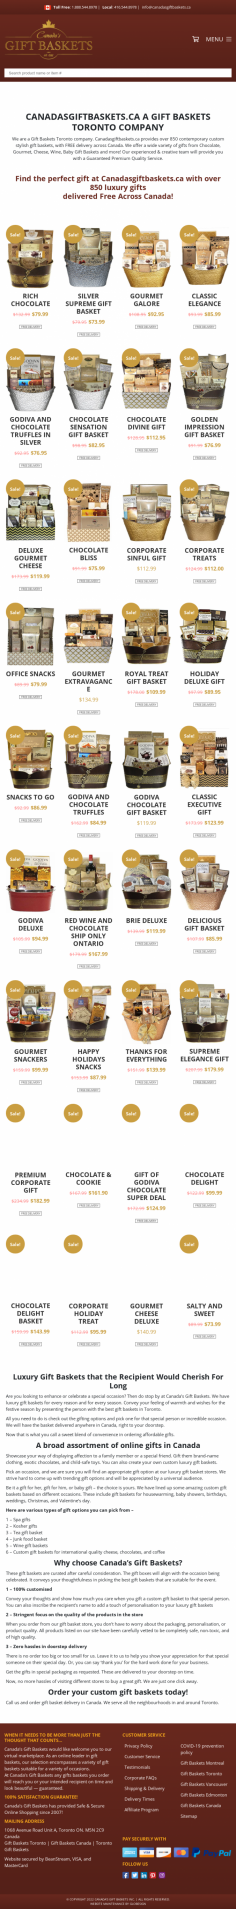 Gift Basket Stores in Canada

We are an online Gift Baskets Toronto company and provide over 850 contemporary custom stylish gift baskets, luxury gift baskets, with FREE delivery across Canada

https://canadasgiftbaskets.ca/